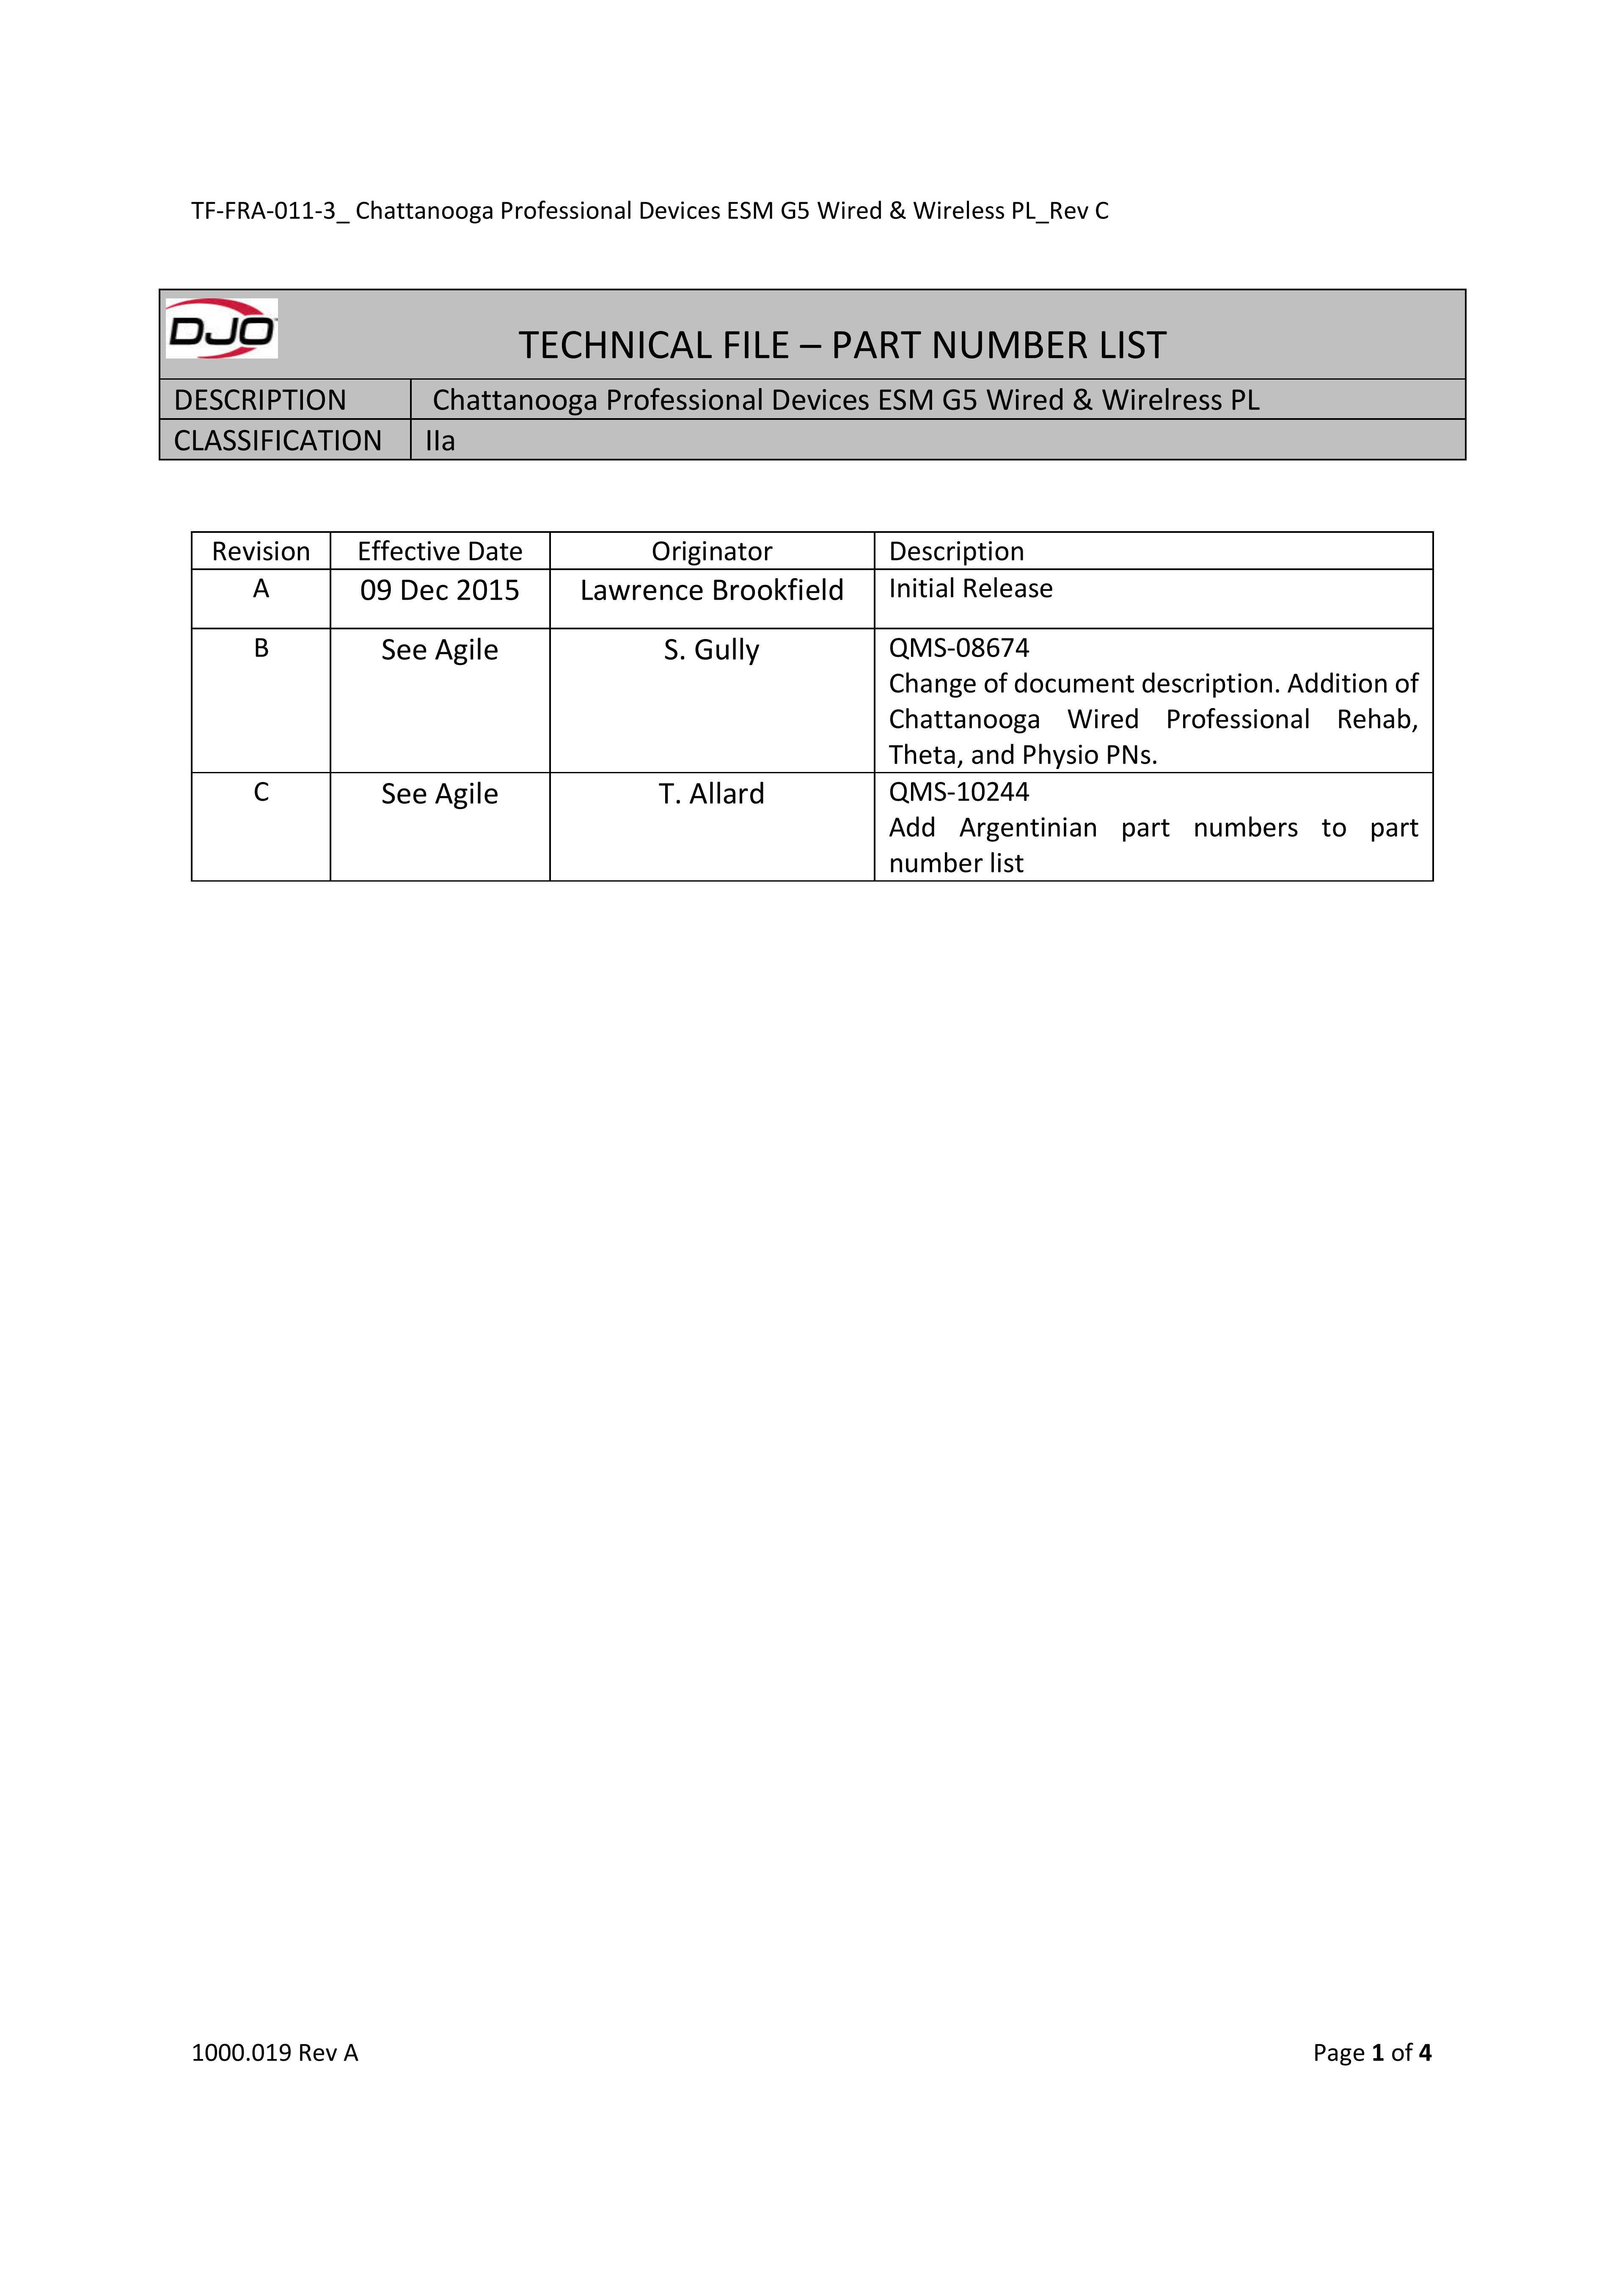 TF-FRA-011-3_ Chattanooga Professional Devices ESM G5 Wired & Wireless PL_Rev C.pdf